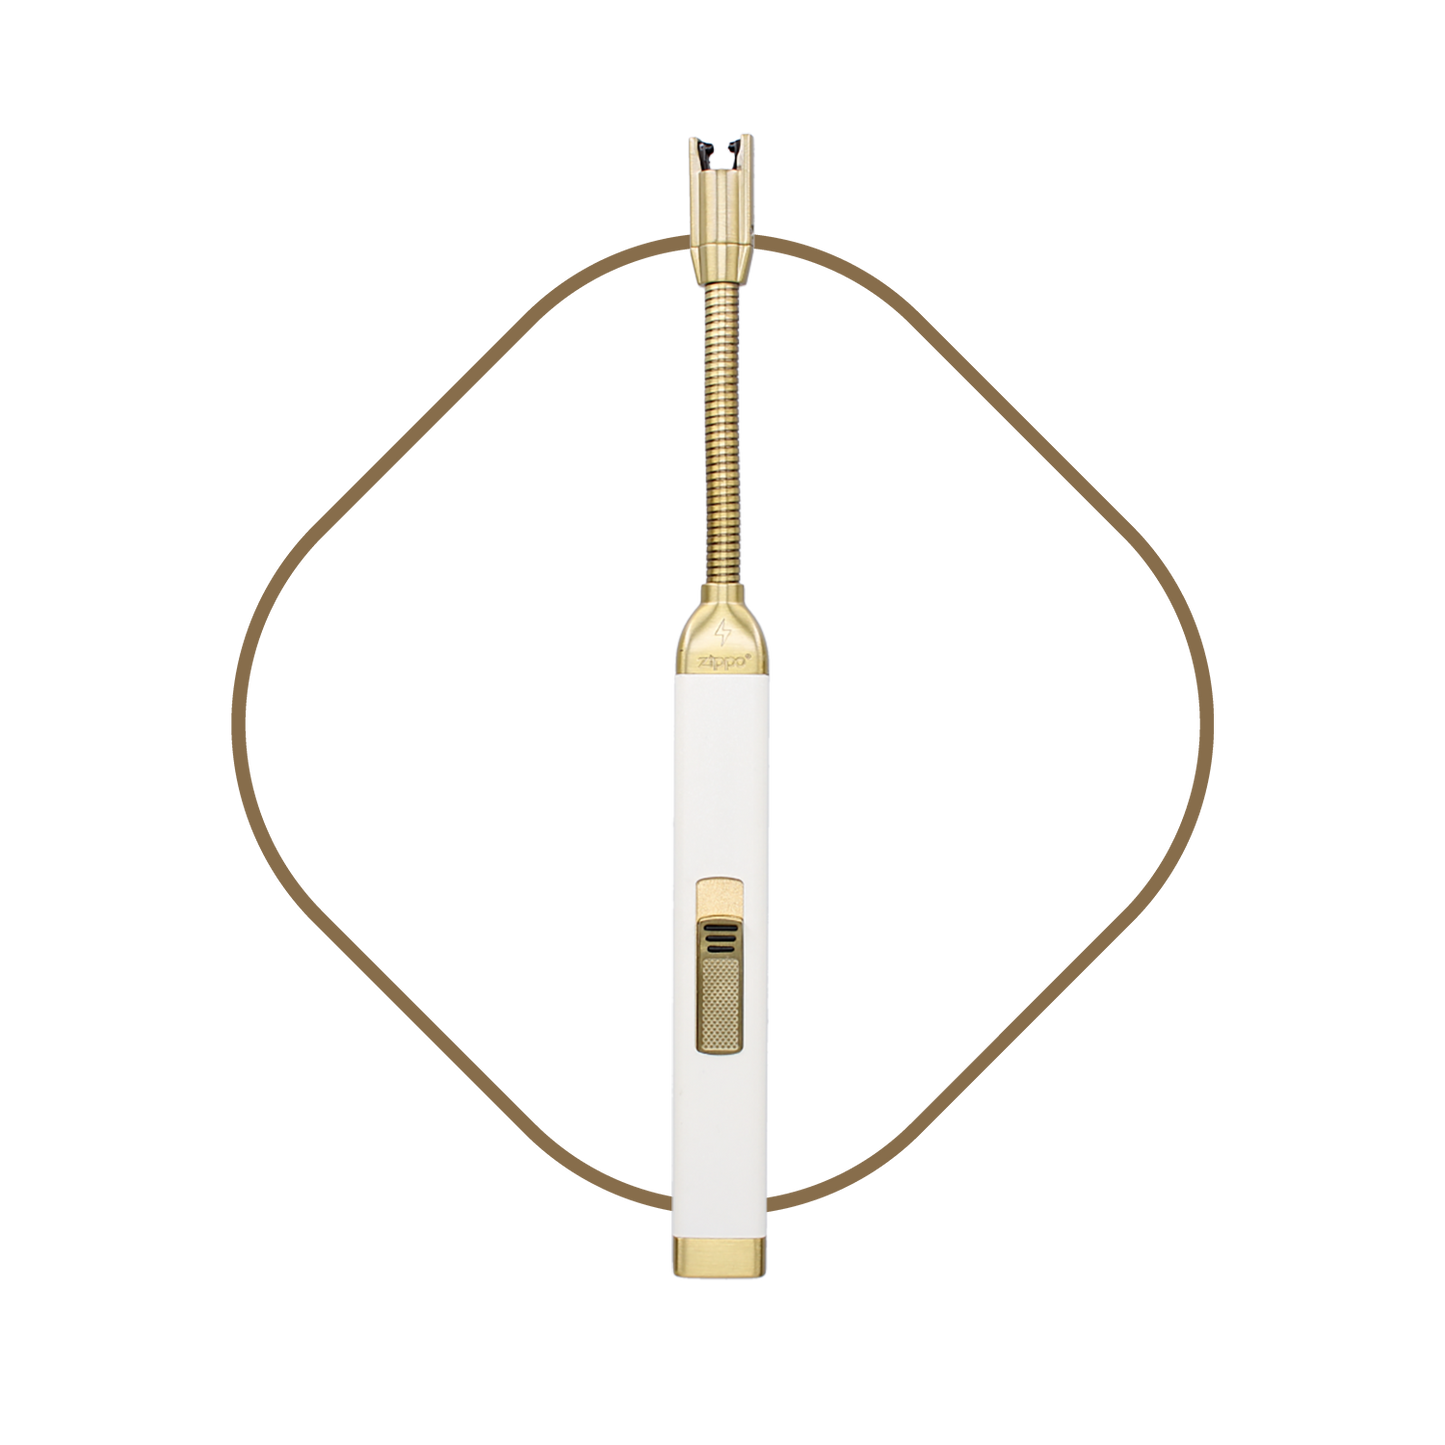 Cream & Gold Rechargeable USB Candle Lighter